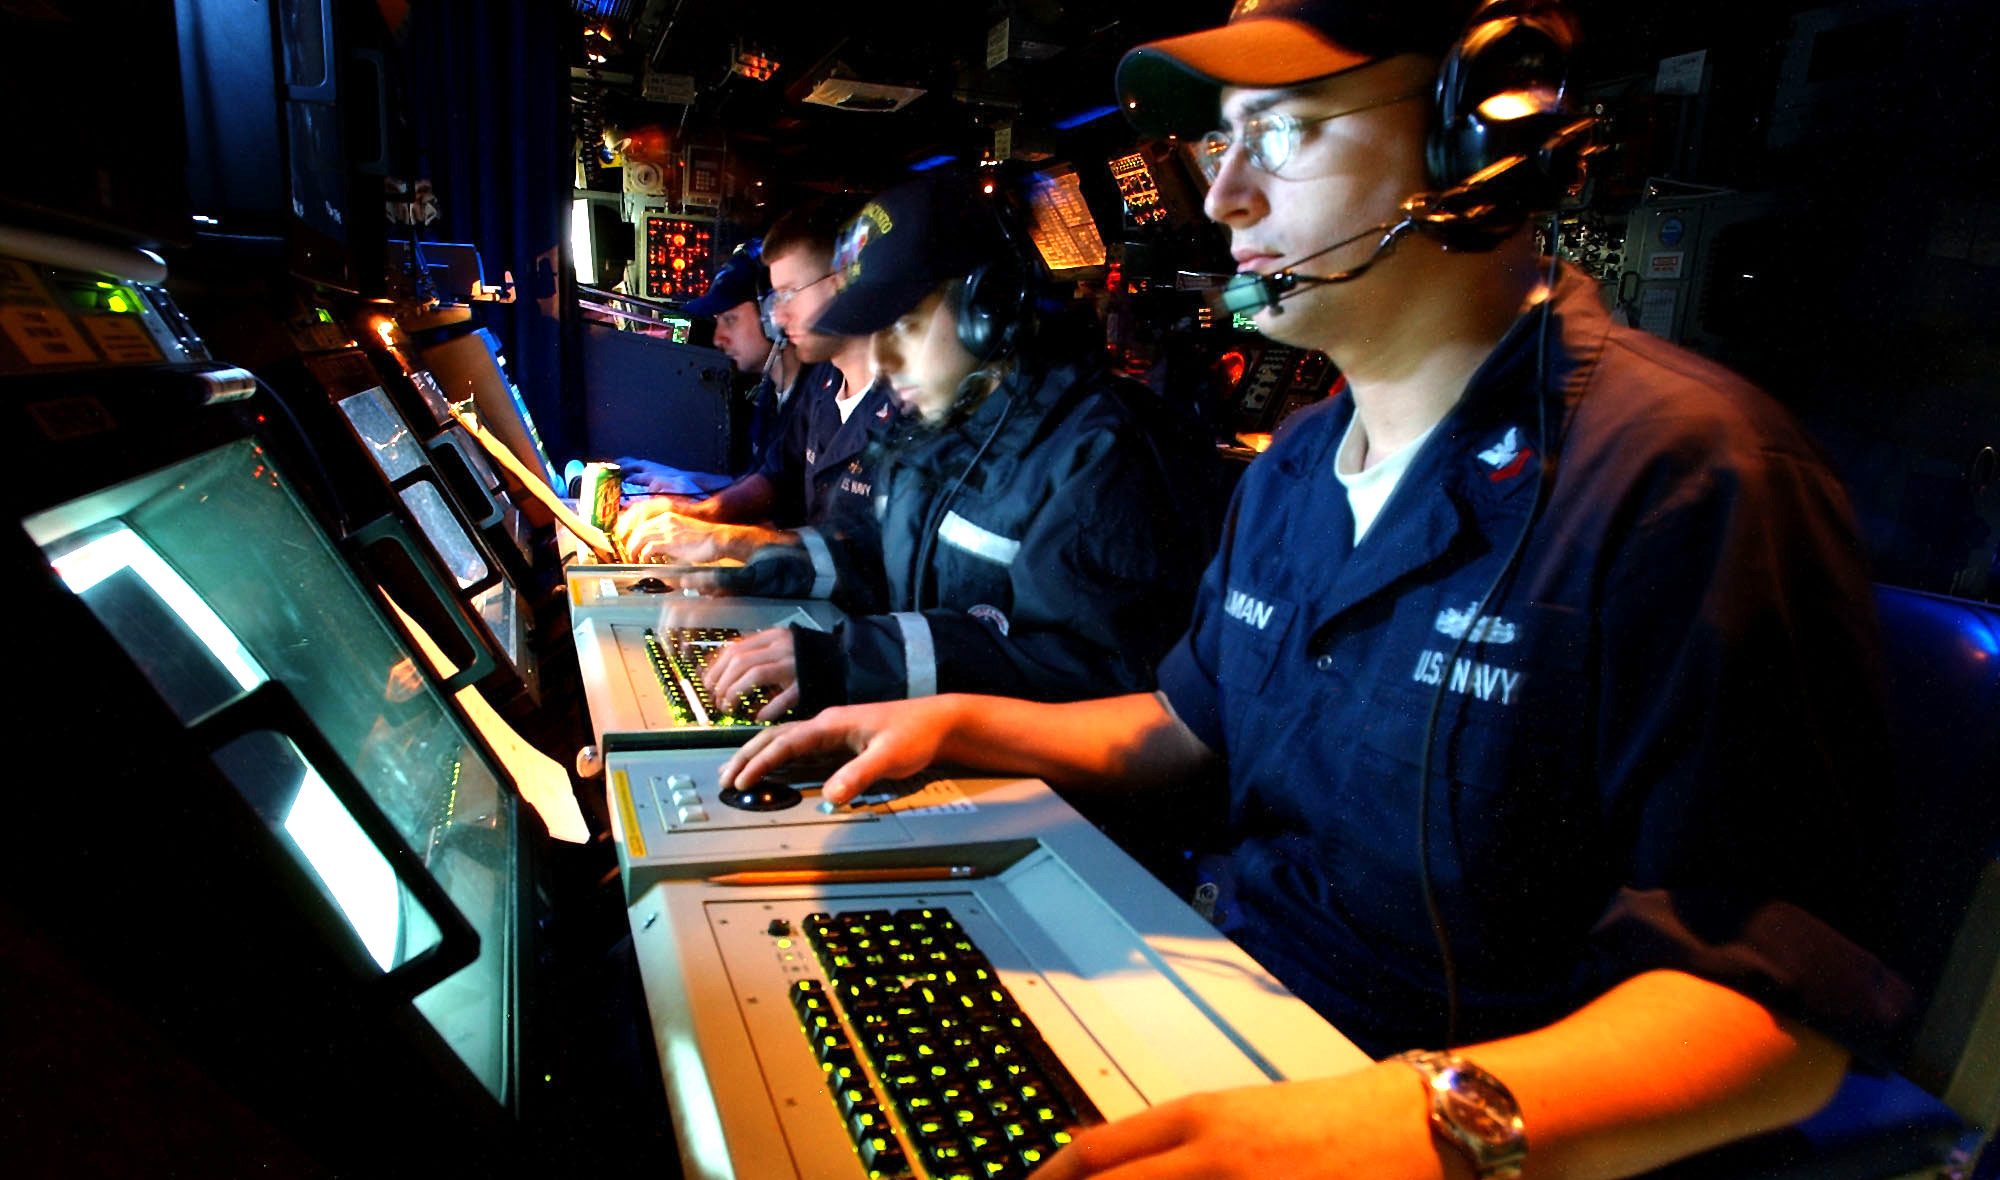 A Cyber Vulnerability Assessment Of The U S Navy In The 21st Century